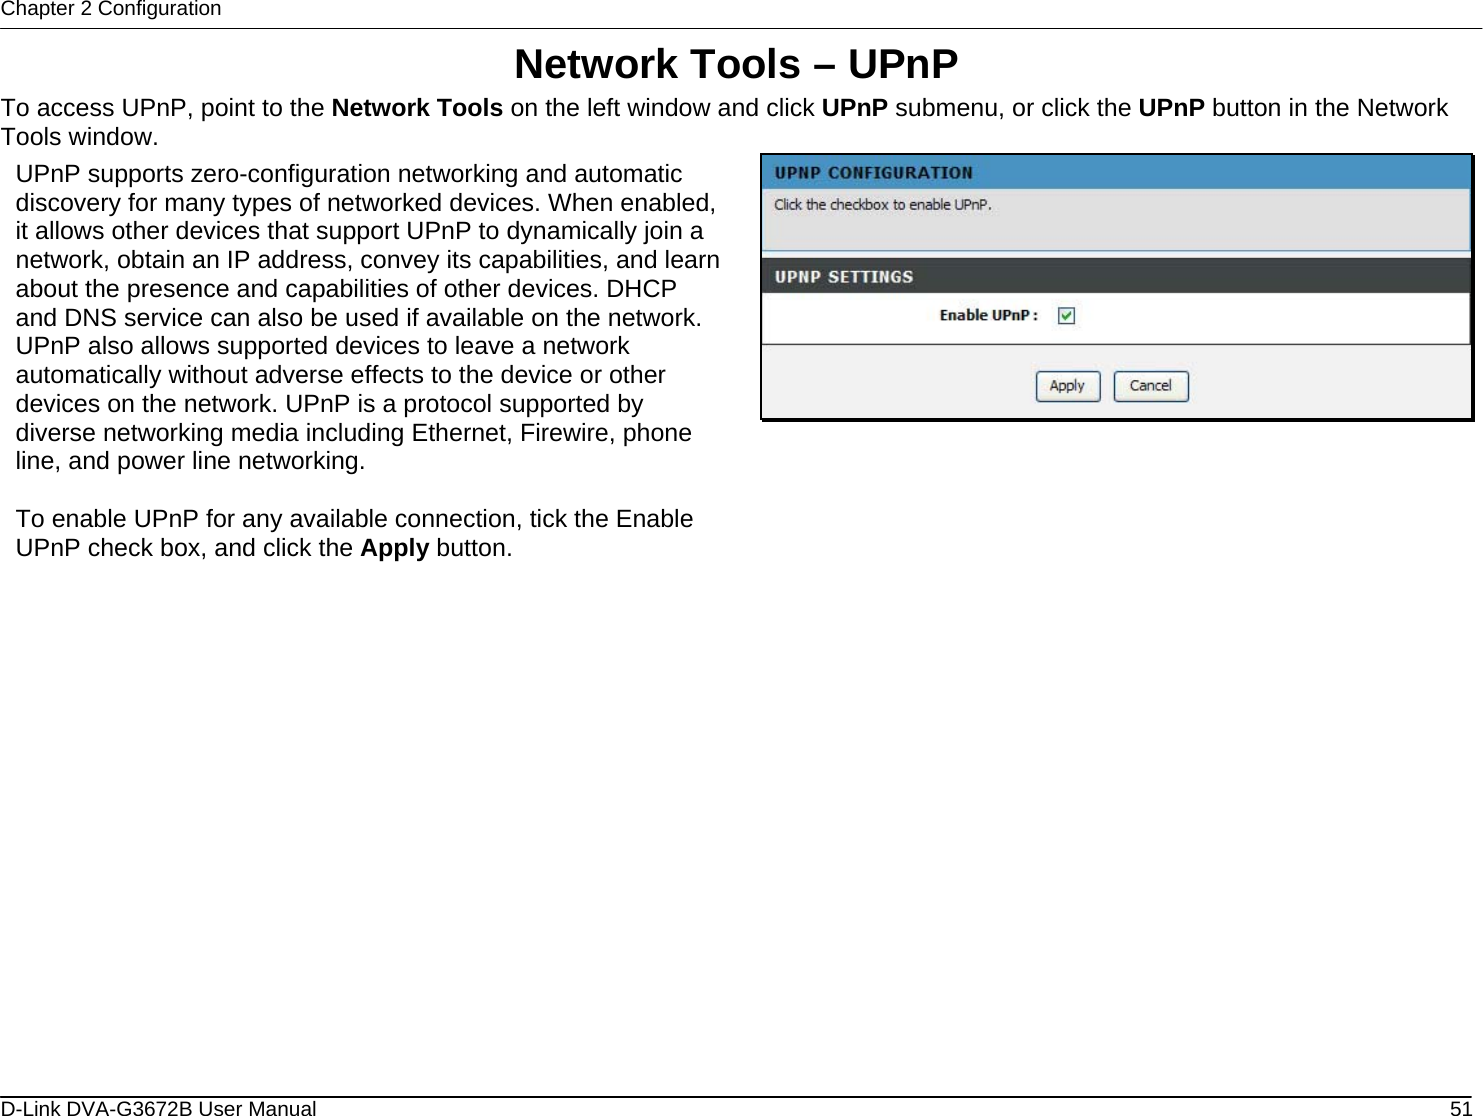 Chapter 2 Configuration Network Tools – UPnP To access UPnP, point to the Network Tools on the left window and click UPnP submenu, or click the UPnP button in the Network Tools window.  UPnP supports zero-configuration networking and automatic discovery for many types of networked devices. When enabled, it allows other devices that support UPnP to dynamically join a network, obtain an IP address, convey its capabilities, and learn about the presence and capabilities of other devices. DHCP and DNS service can also be used if available on the network. UPnP also allows supported devices to leave a network automatically without adverse effects to the device or other devices on the network. UPnP is a protocol supported by diverse networking media including Ethernet, Firewire, phone line, and power line networking.  To enable UPnP for any available connection, tick the Enable UPnP check box, and click the Apply button.                       D-Link DVA-G3672B User Manual  51